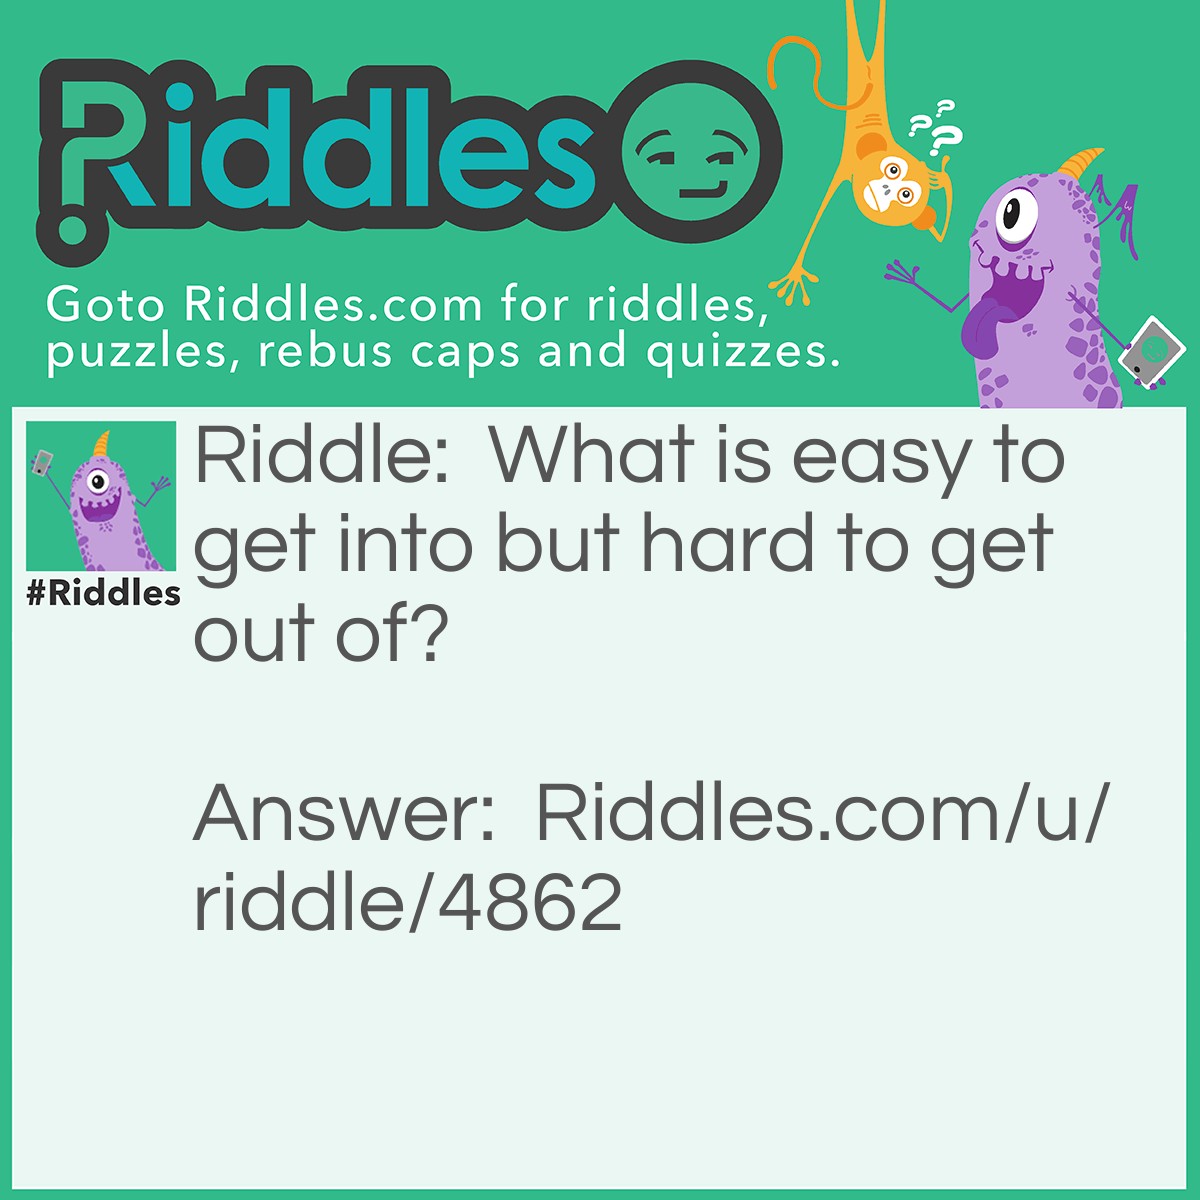 Riddle: What is easy to get into but hard to get out of? Answer: Trouble.